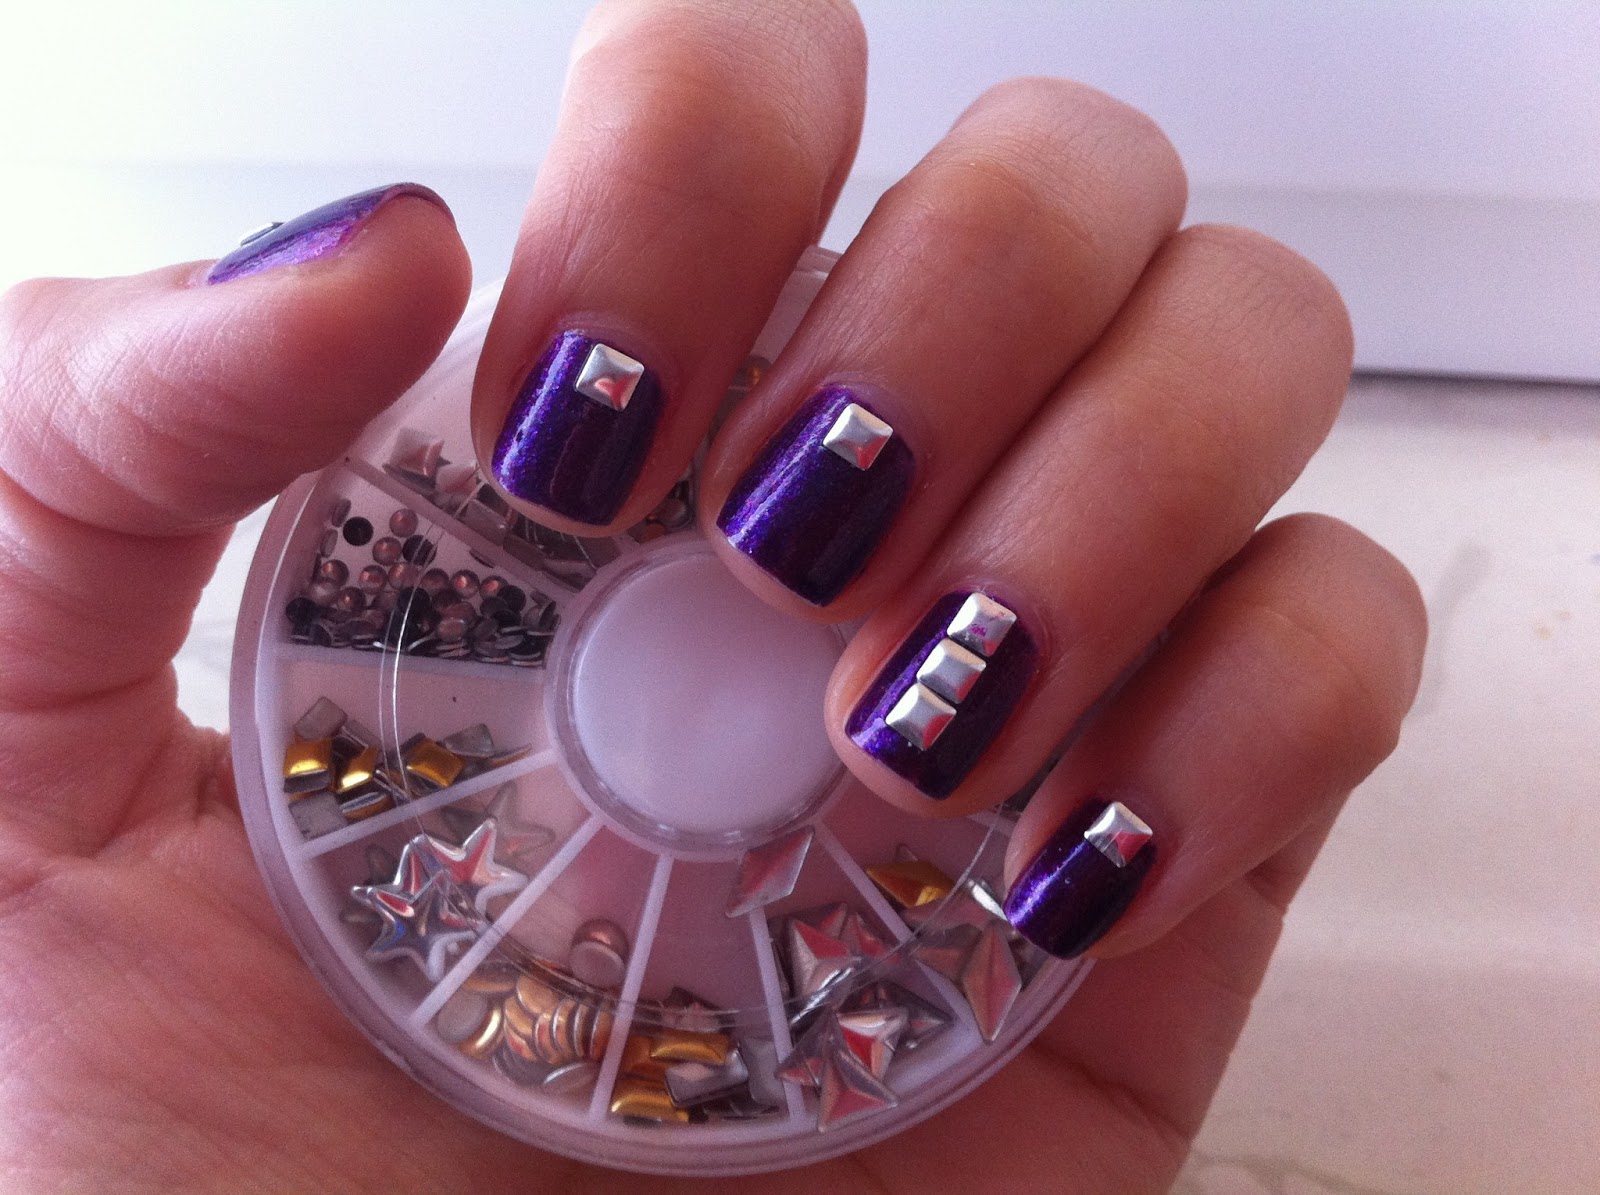 2. How to Create a Stunning Rhinestone Nail Design at Home - wide 11